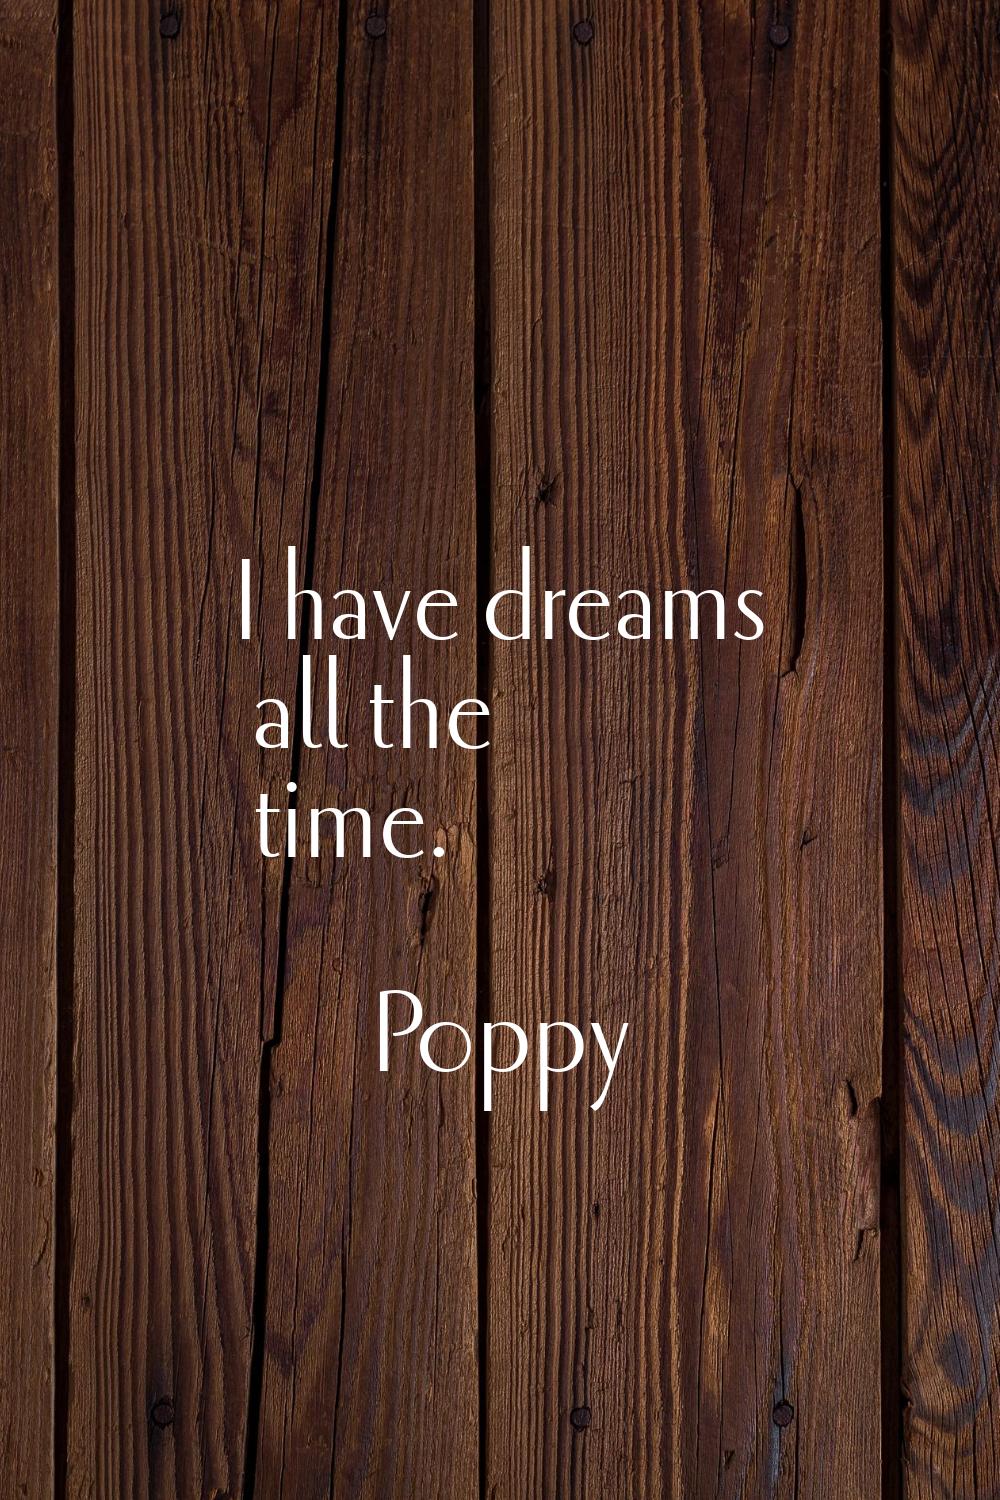 I have dreams all the time.